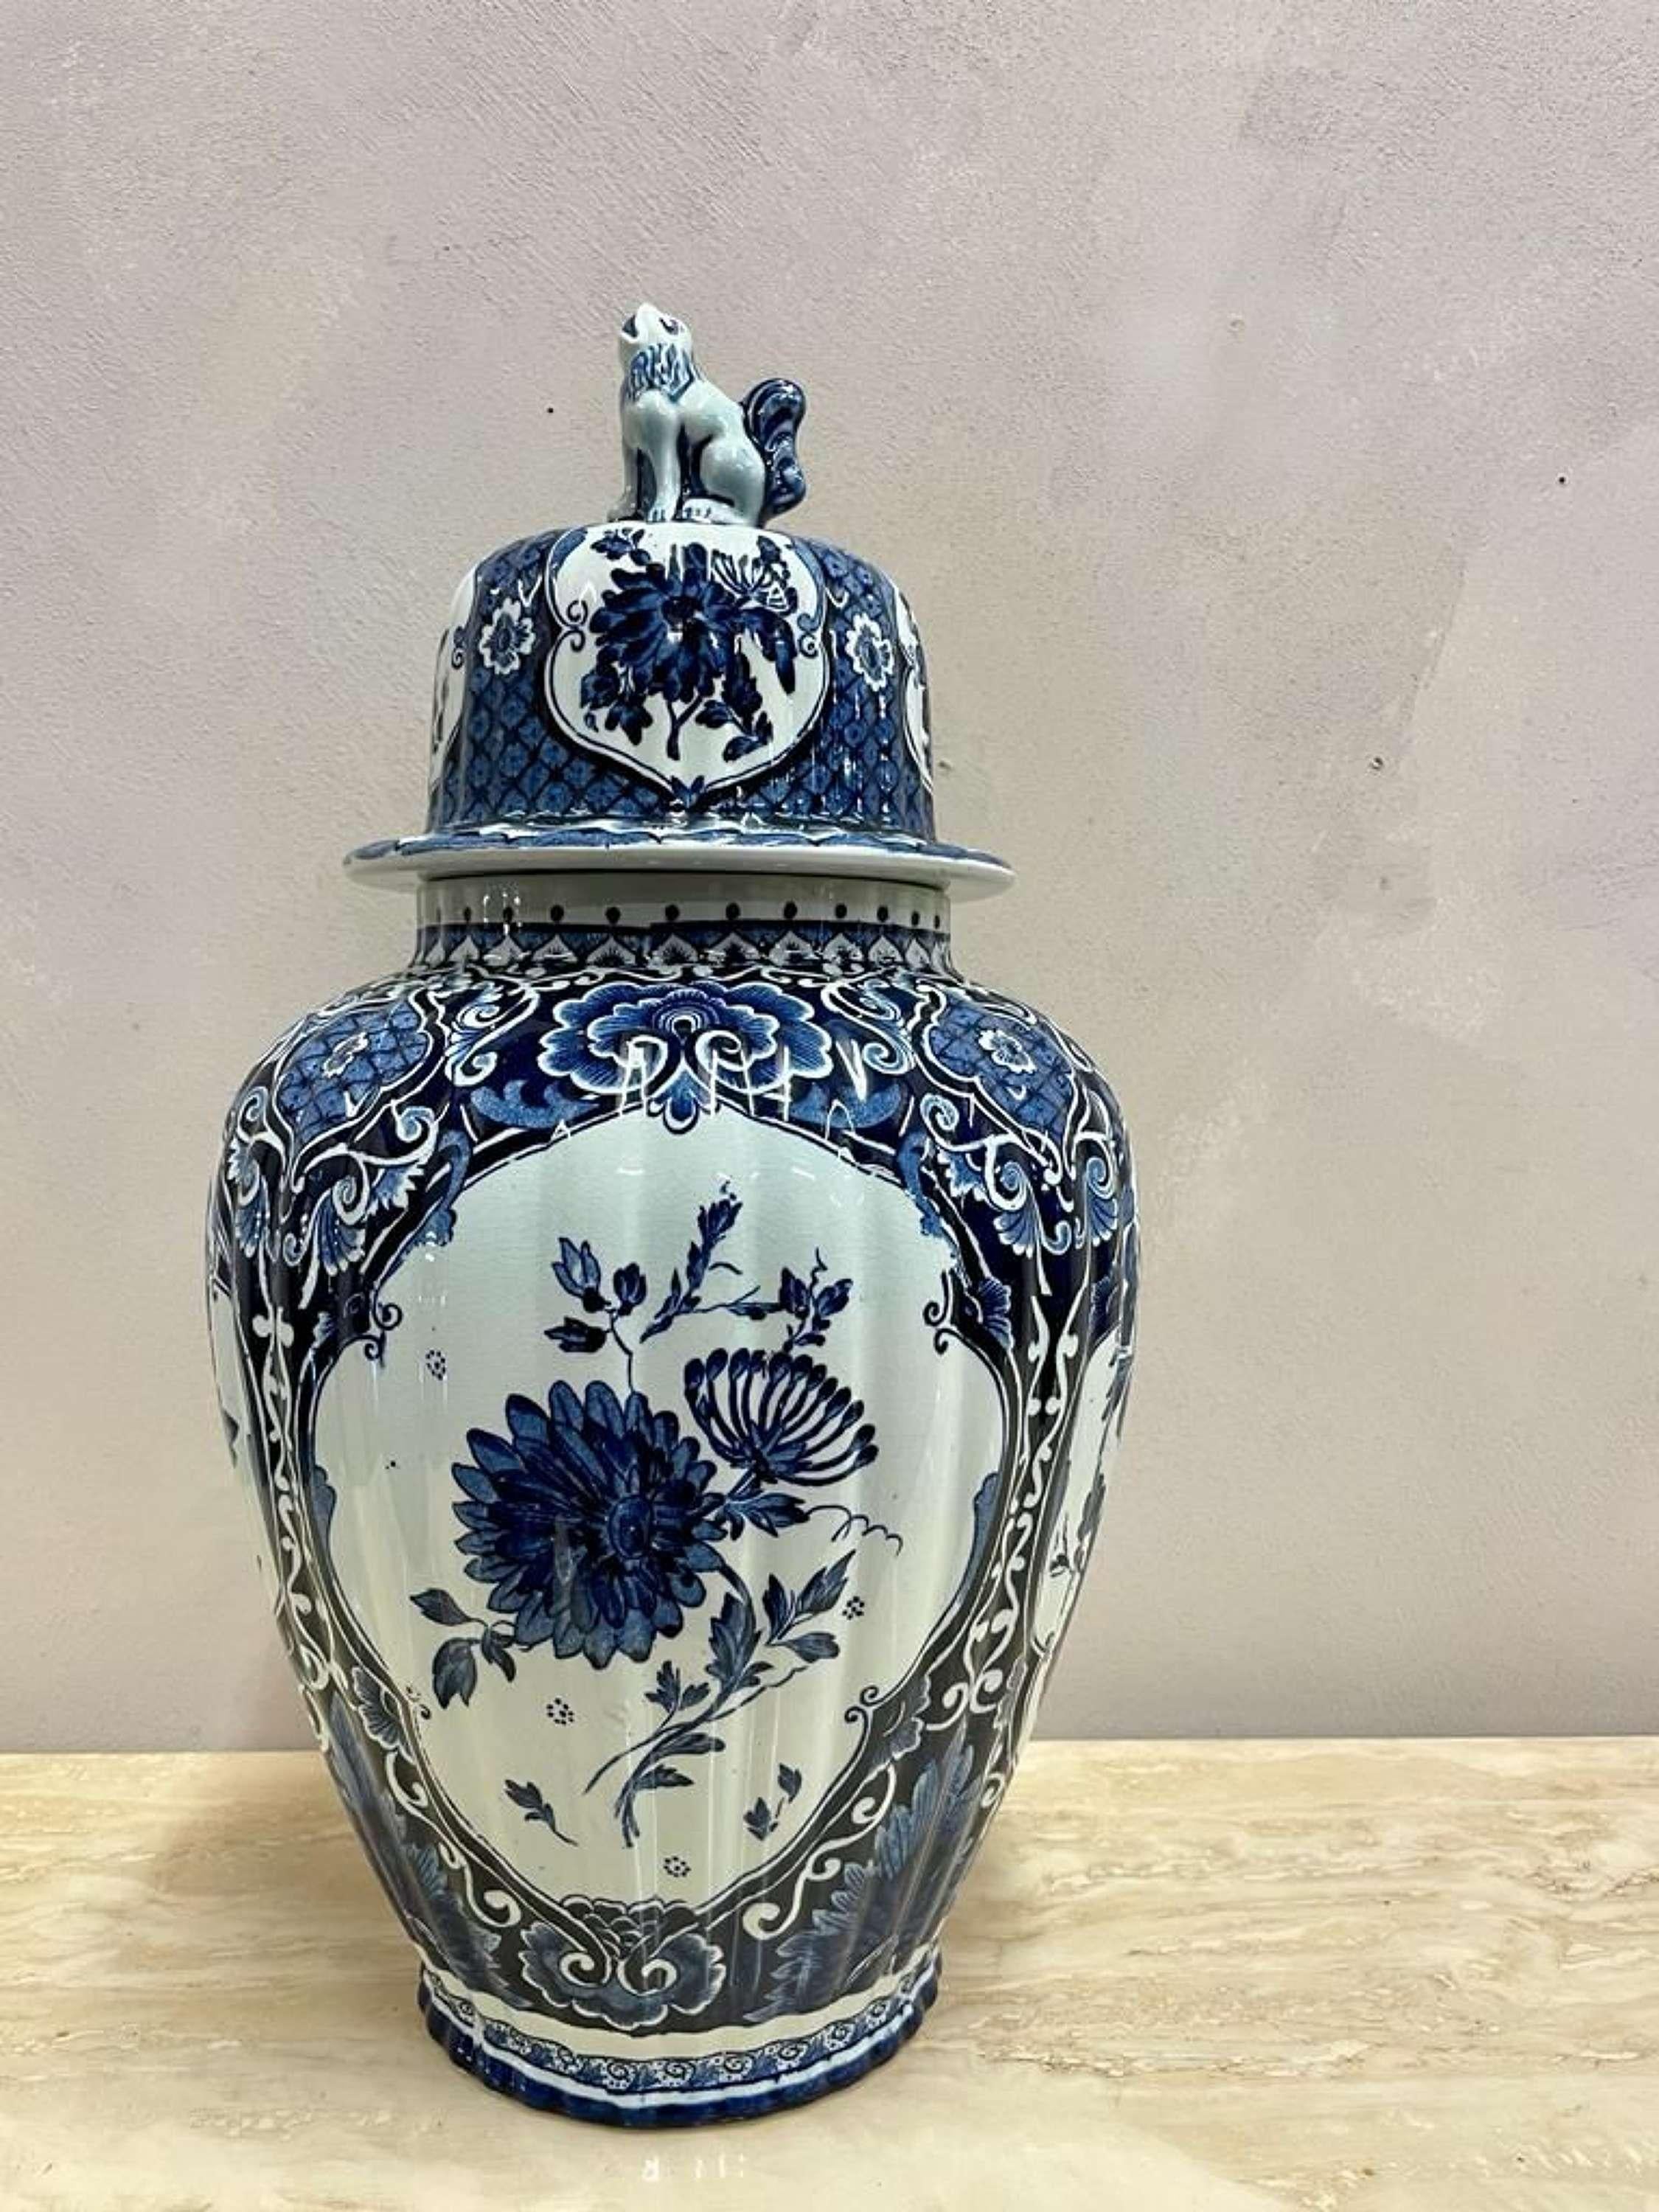 Late 19th Century Medium & Large Delft Ginger Jars with Covers by Petrous Regout For Sale 1